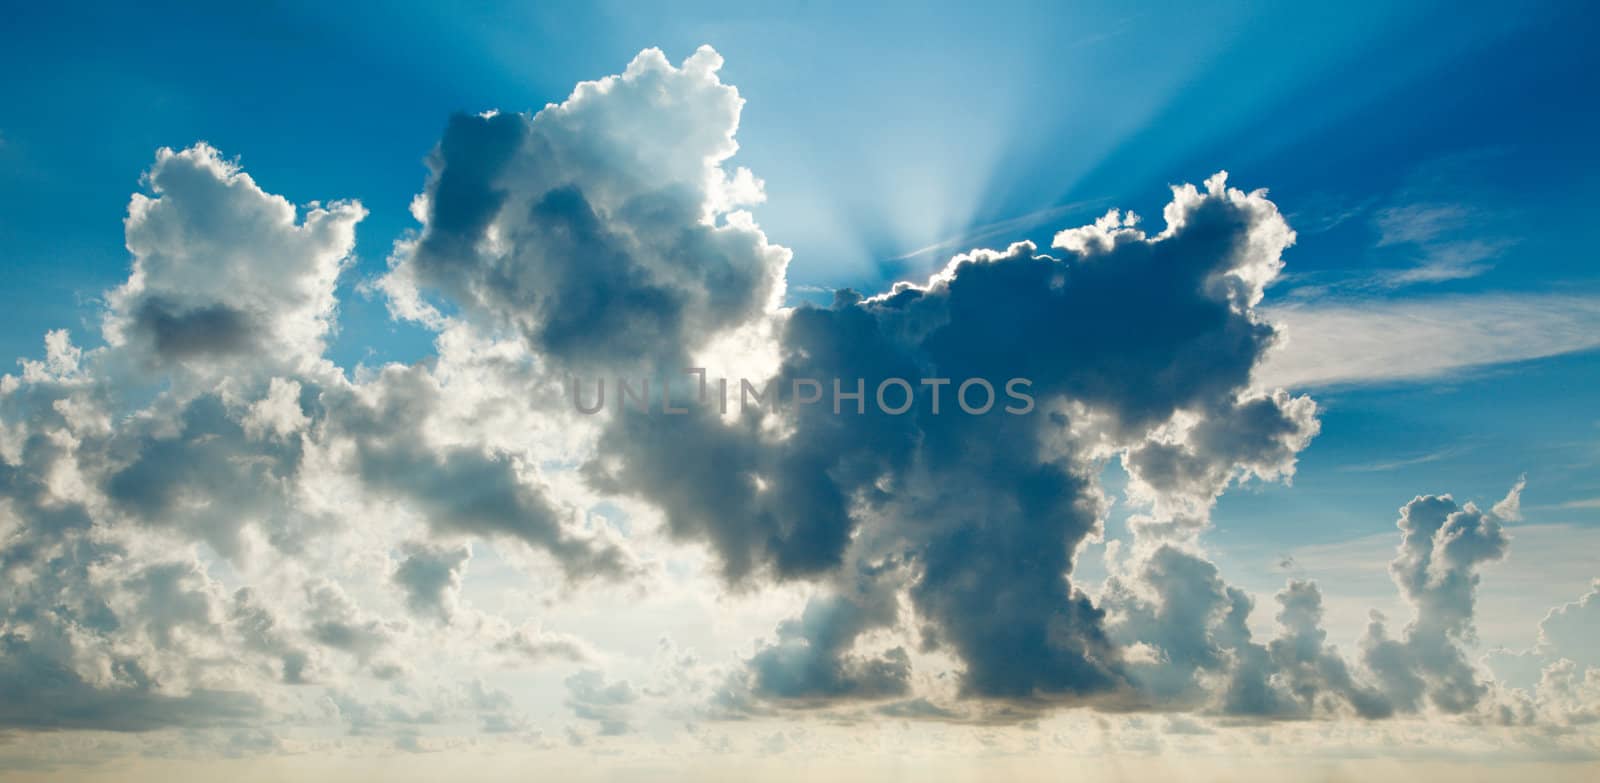 Clouds in sky with sunrays by dimol